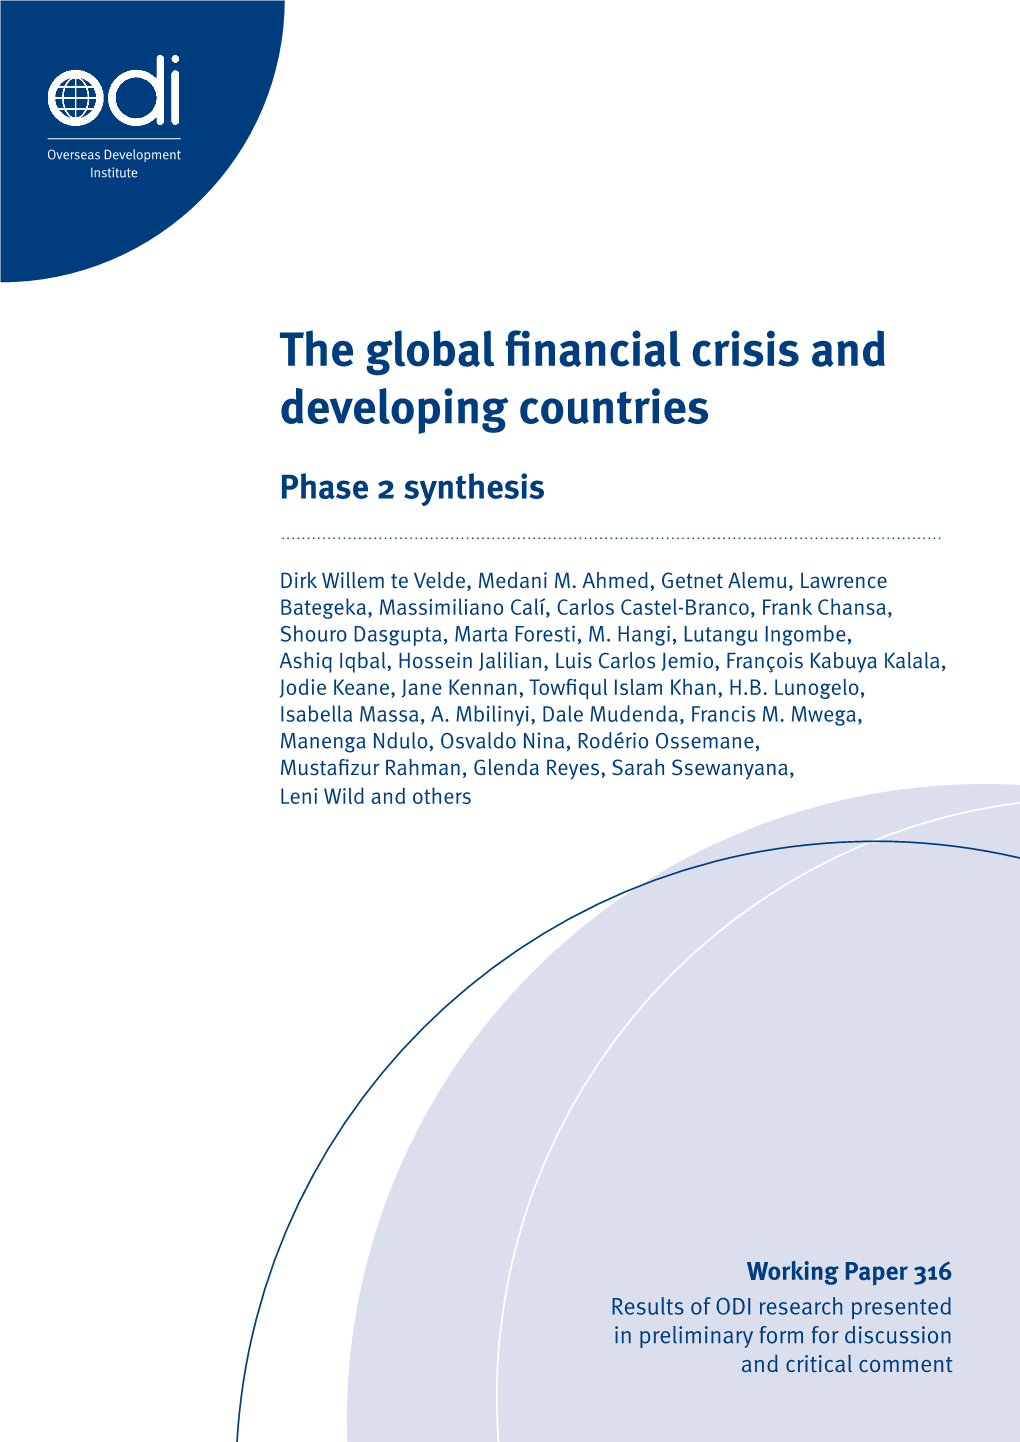 The Global Financial Crisis and Developing Countries